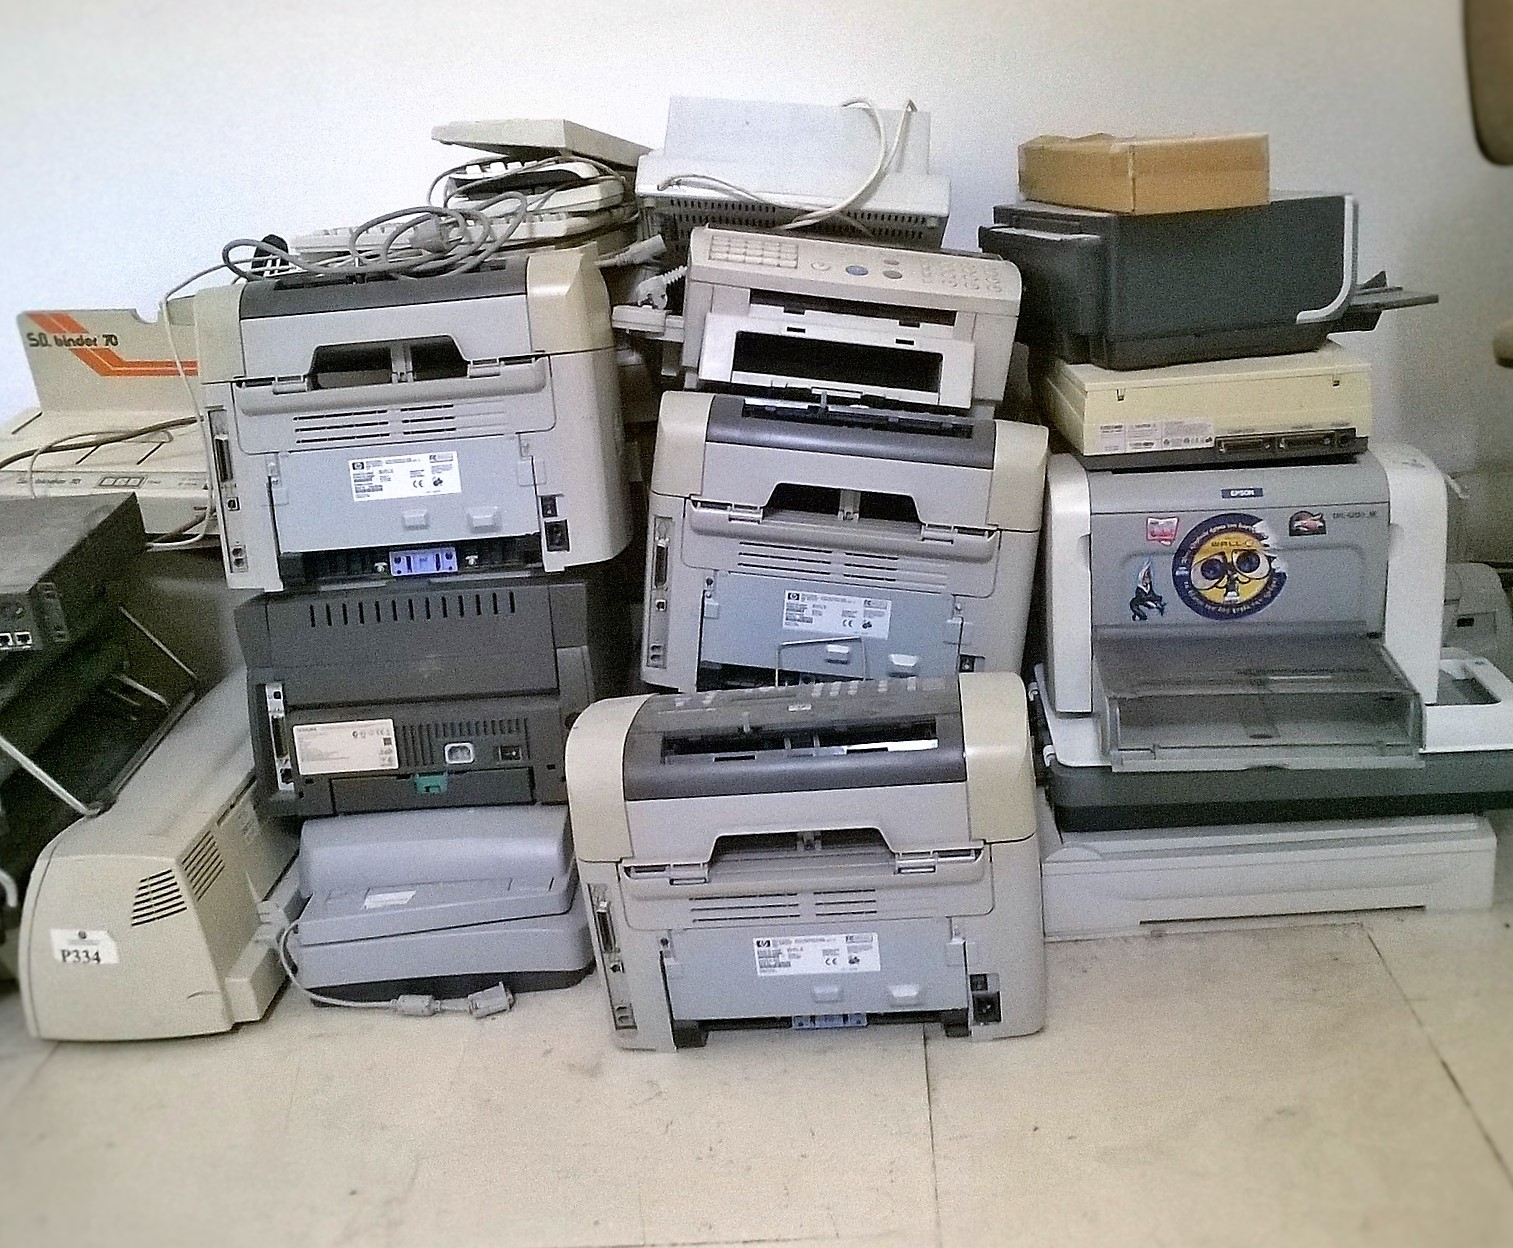 used copiers in tampa fl,used photocopiers tampa,used copiers tampa,used copiers tampa fl